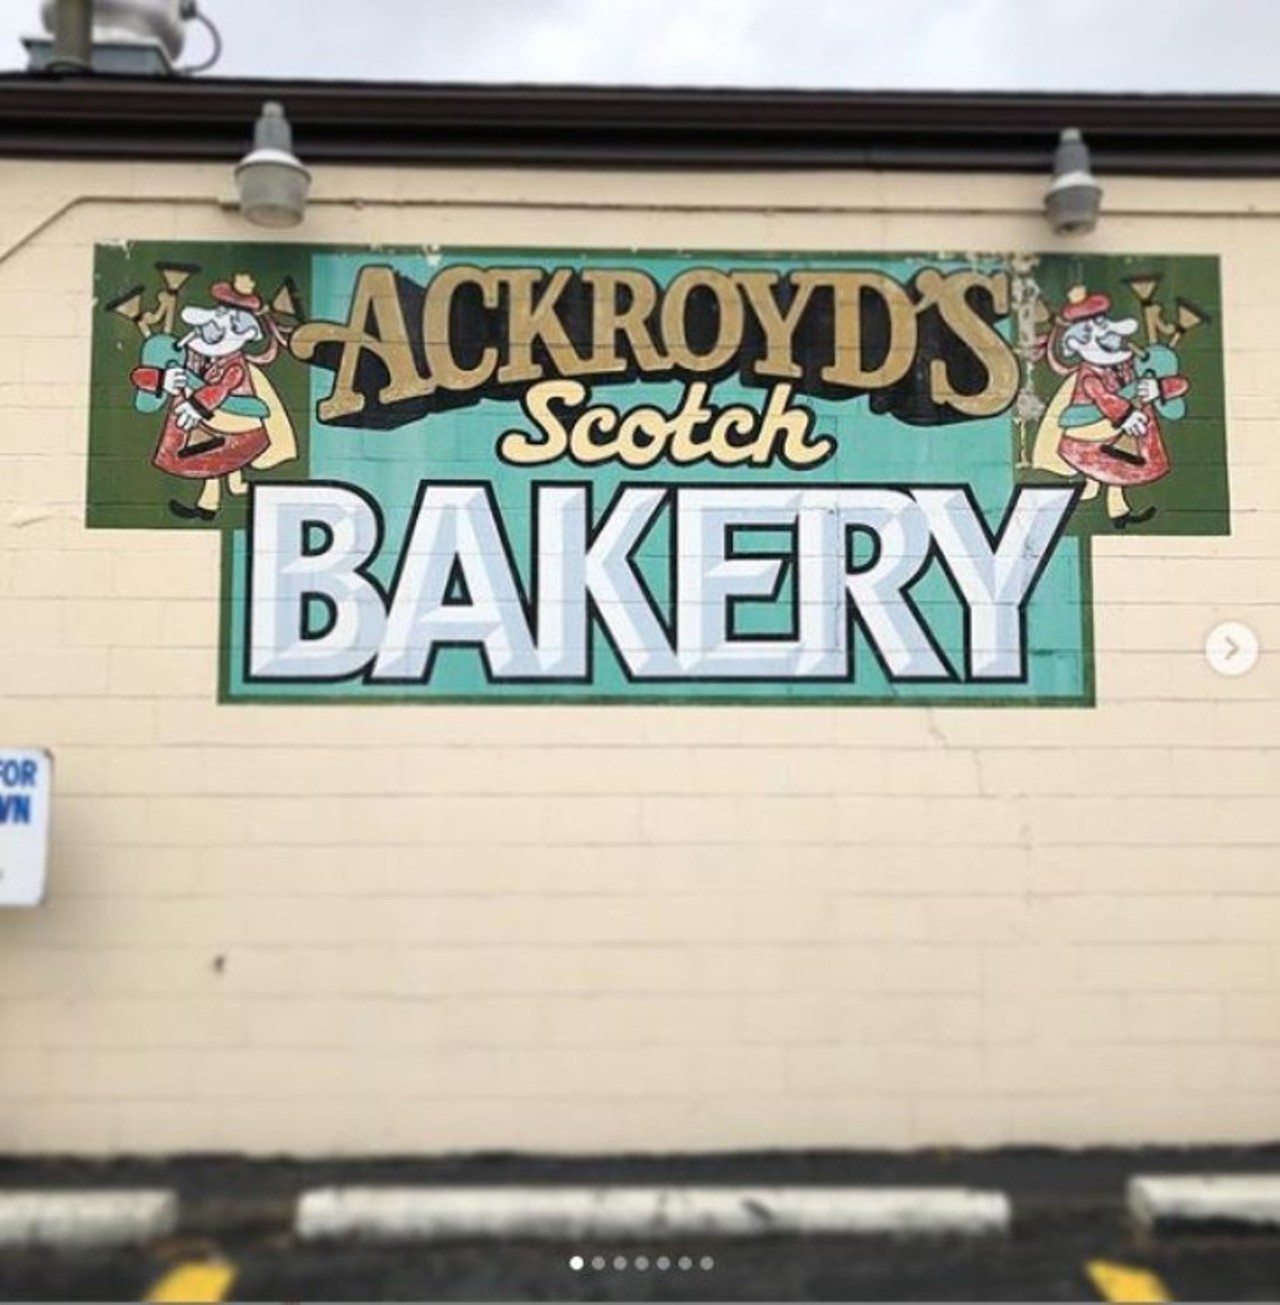 Ackroyd's Scottish Bakery
25566 Five Mile Rd., Redford Charter Twp.; 313-532-1181
When Ackroyd&#146;s open up in 1949, the plan was to be a modest Scottish butcher shop serving haggis, black pudding, and beef bangers. Shortly after opening, however, Ackroyd&#146;s customers began demanding Scottish meat pies and other traditional Scottish delicacies. It took some time to streamline the baking process to be able to supply enough meat pies for Ackroyd&#146;s hungry customers, but once it did, Ackroyd&#146;s Scottish Bakery became a hit in metro Detroit. Seventy years later, and Ackroyd&#146;s still delights customers with their traditional Scott&#146;s meat pies, ferns, tea cakes, and shortcakes. 
Photo courtesy of Instagram user jennaalder